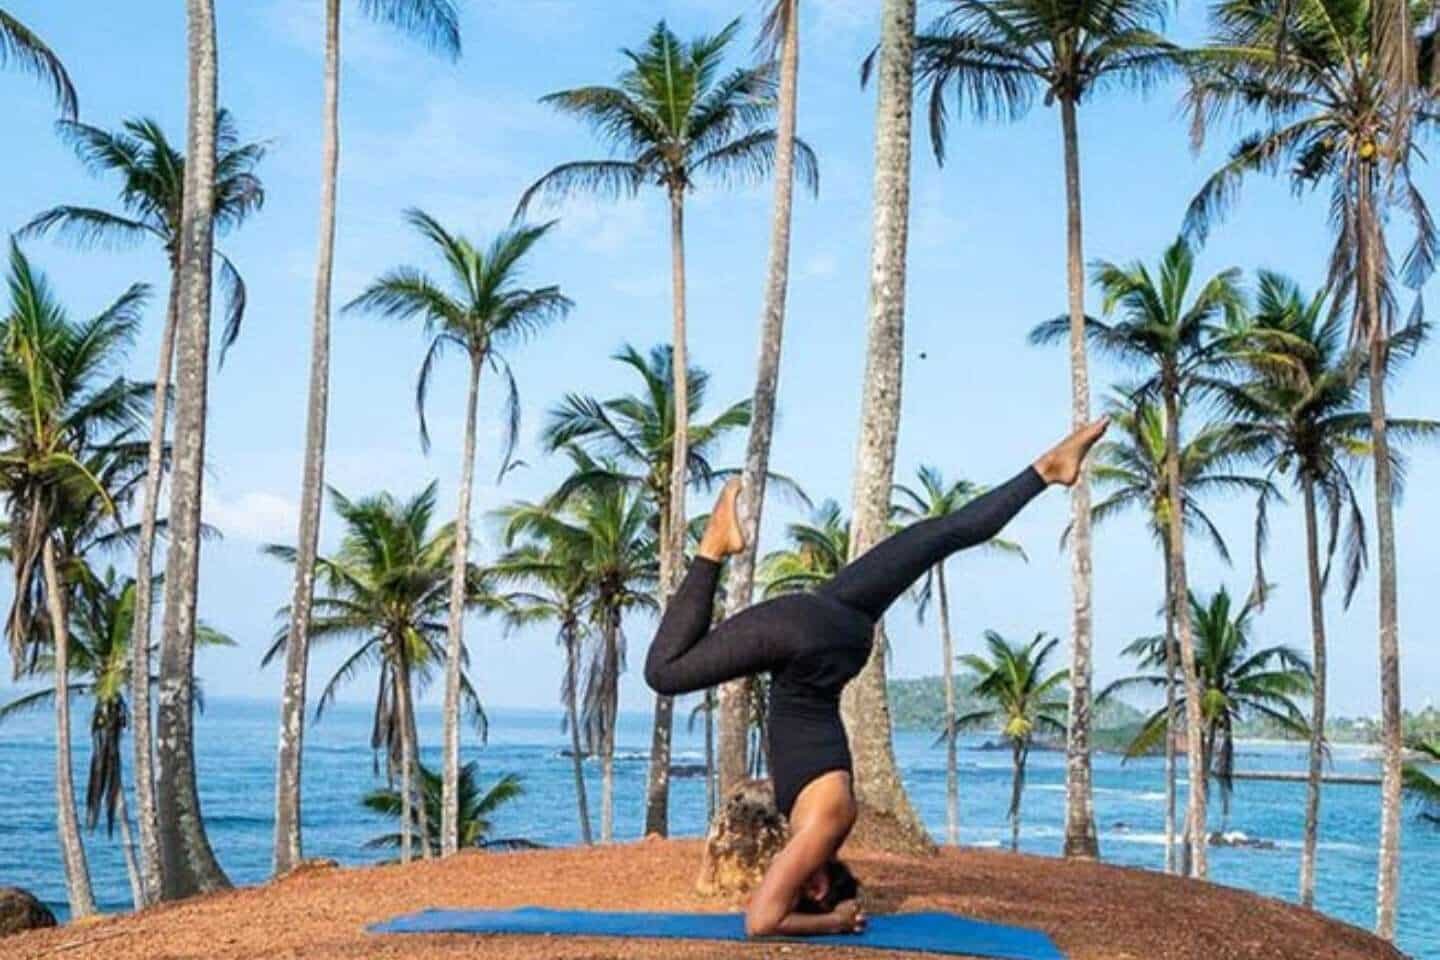 A woman during yoga amongst palm trees and the ocean in Sri Lanka